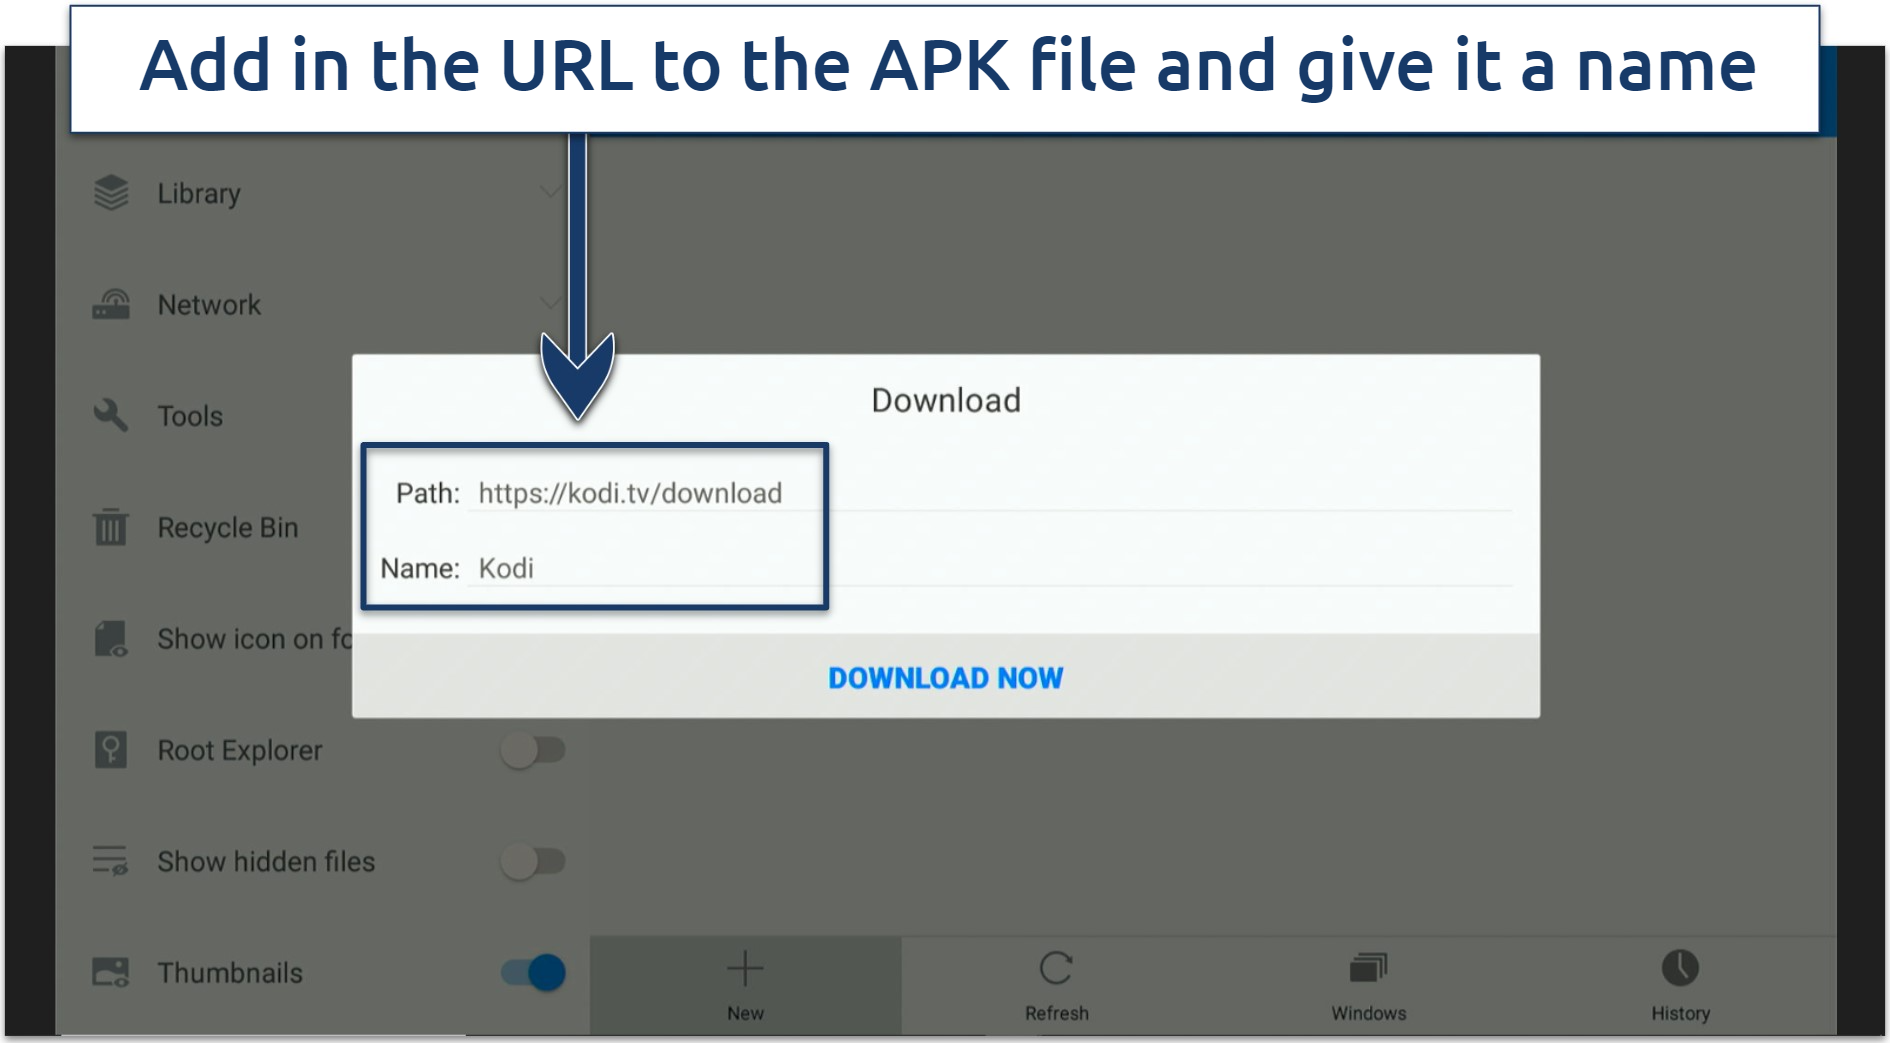 A screenshot showing how to add the URL of an APK file and give it a name in Firestick.